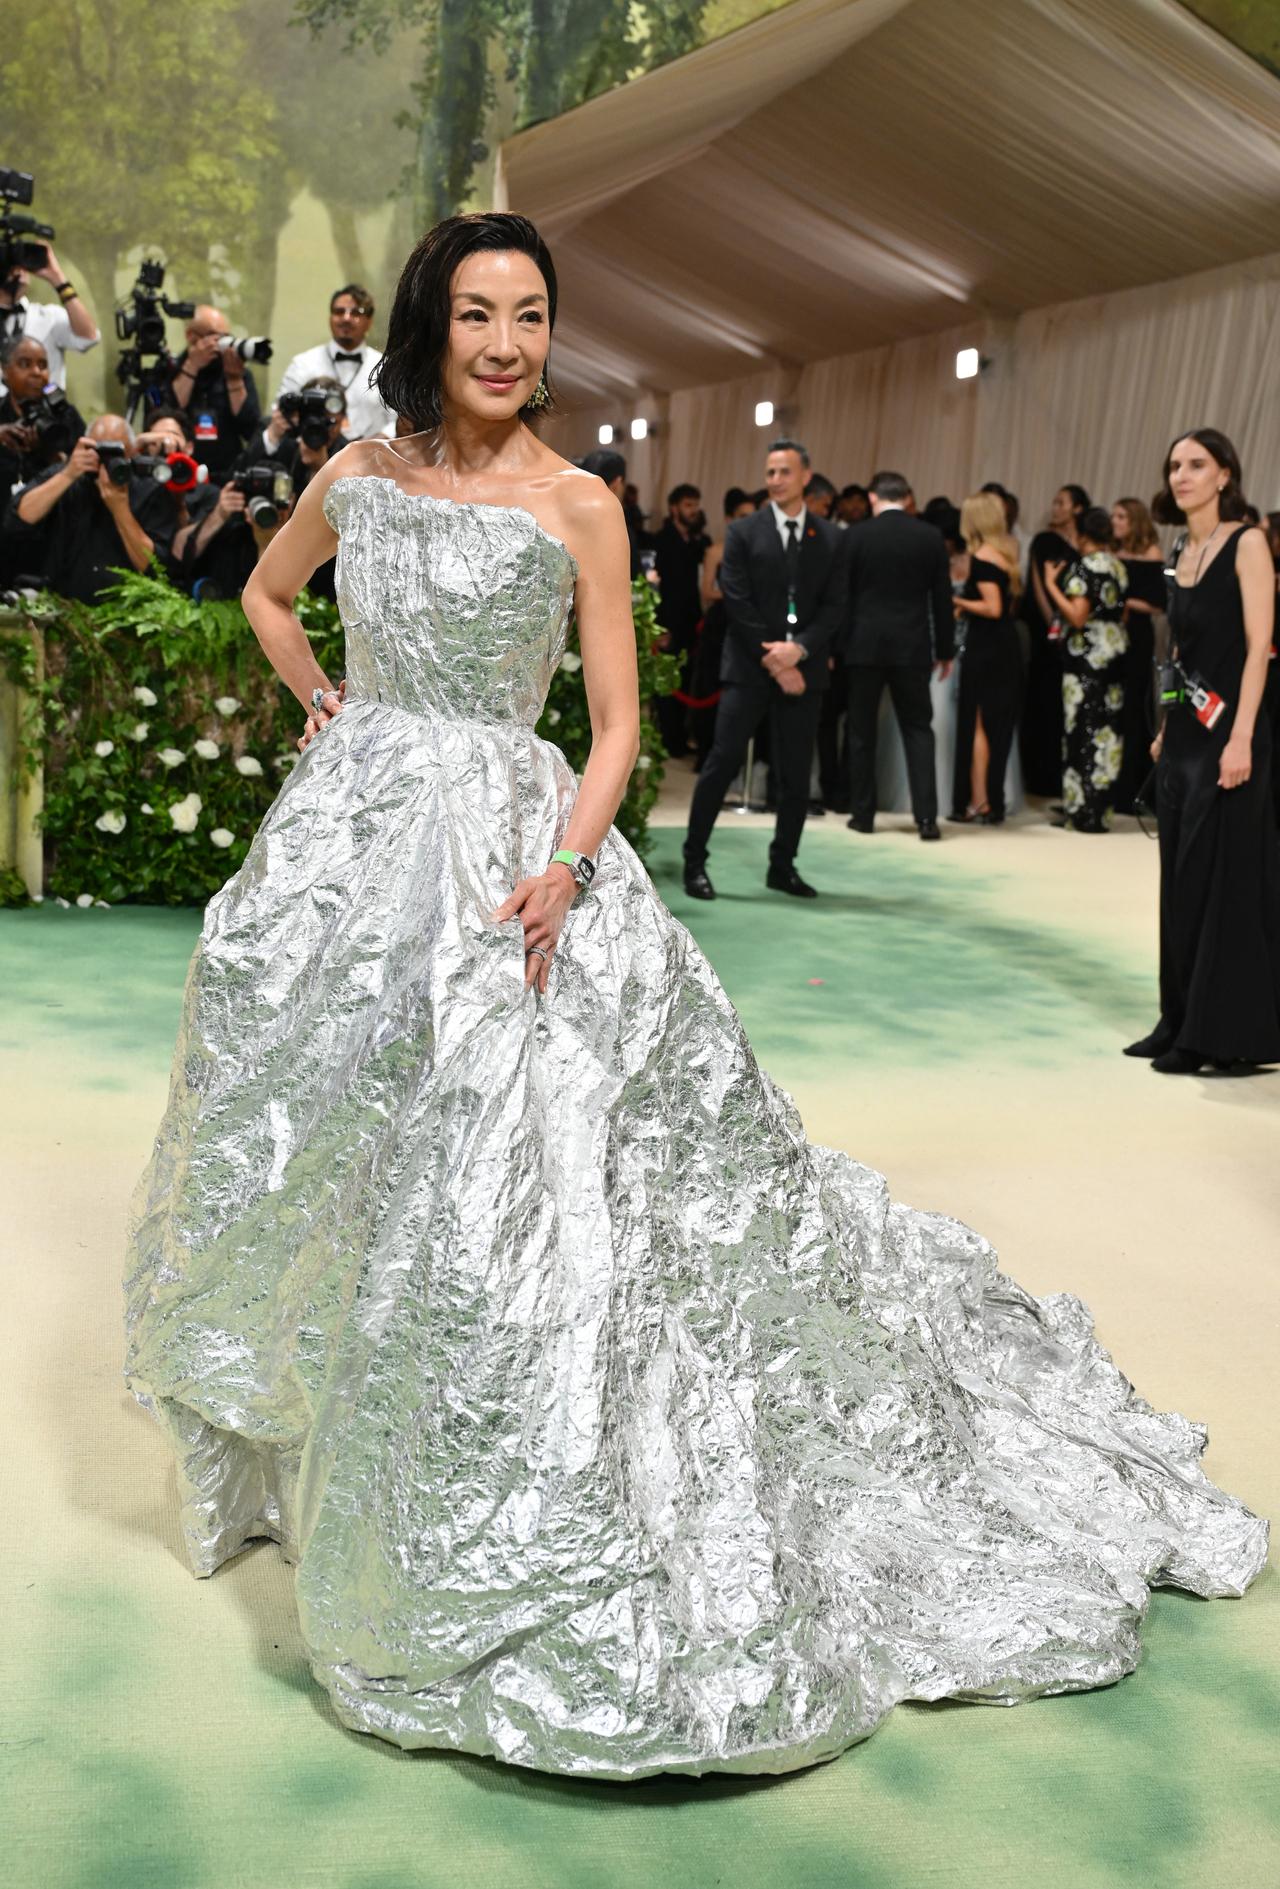 Academy Award winner Michelle Yeoh failed to impress with her 'tin foil' gown designed by Balenciaga.